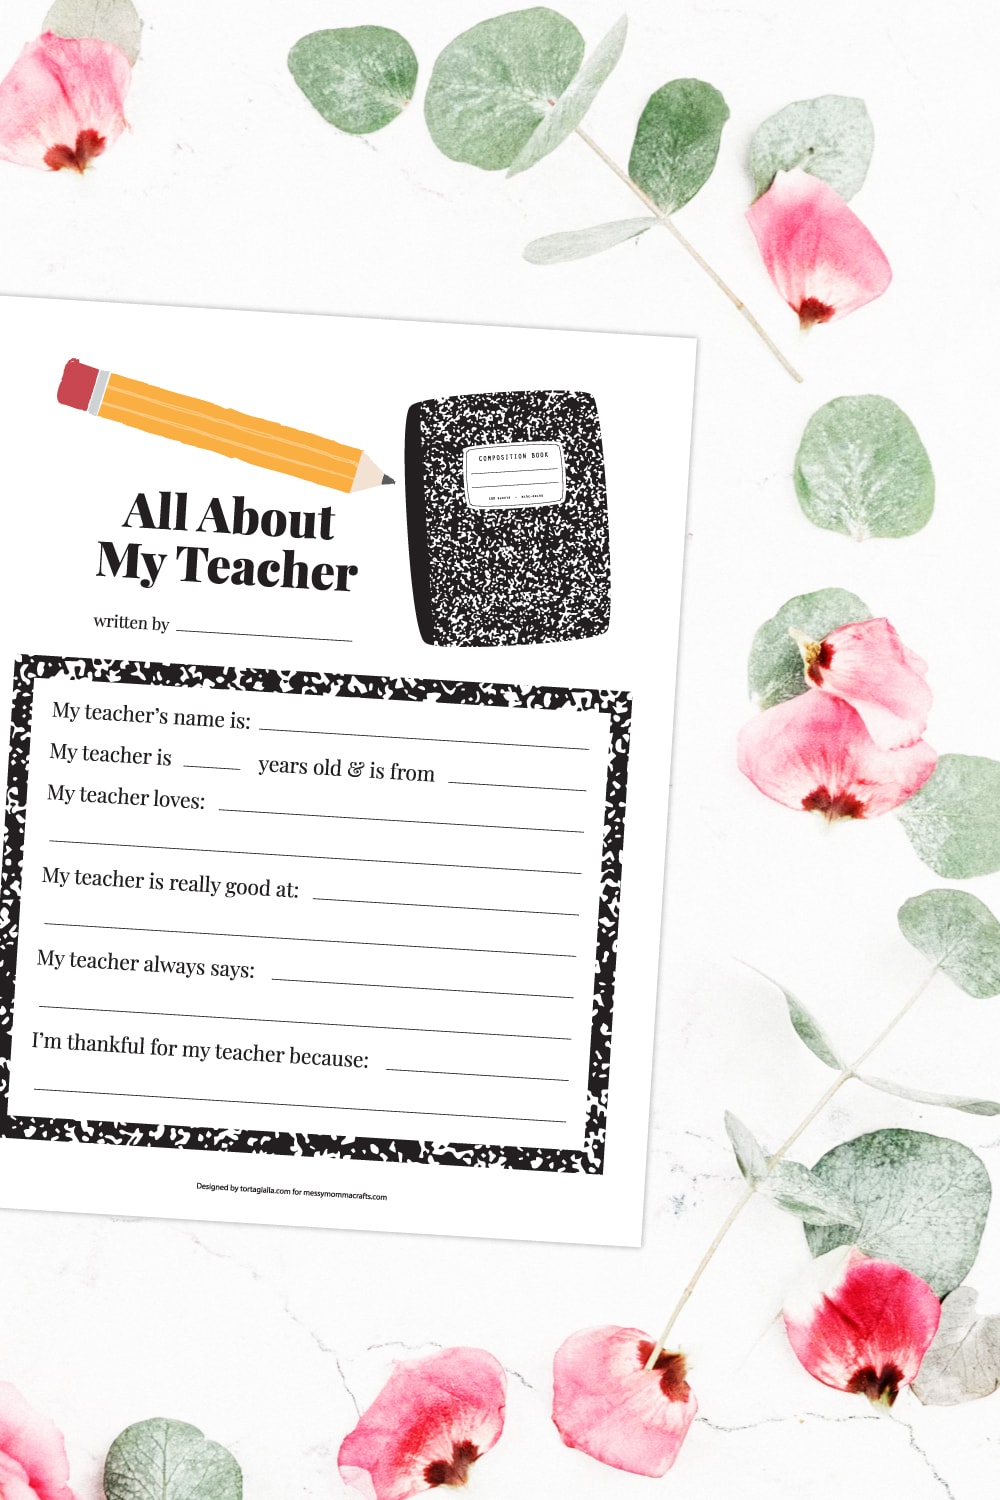 Preview of all about my teacher printable page on white background with pink flower petals and green leaves on top right and bottom border.